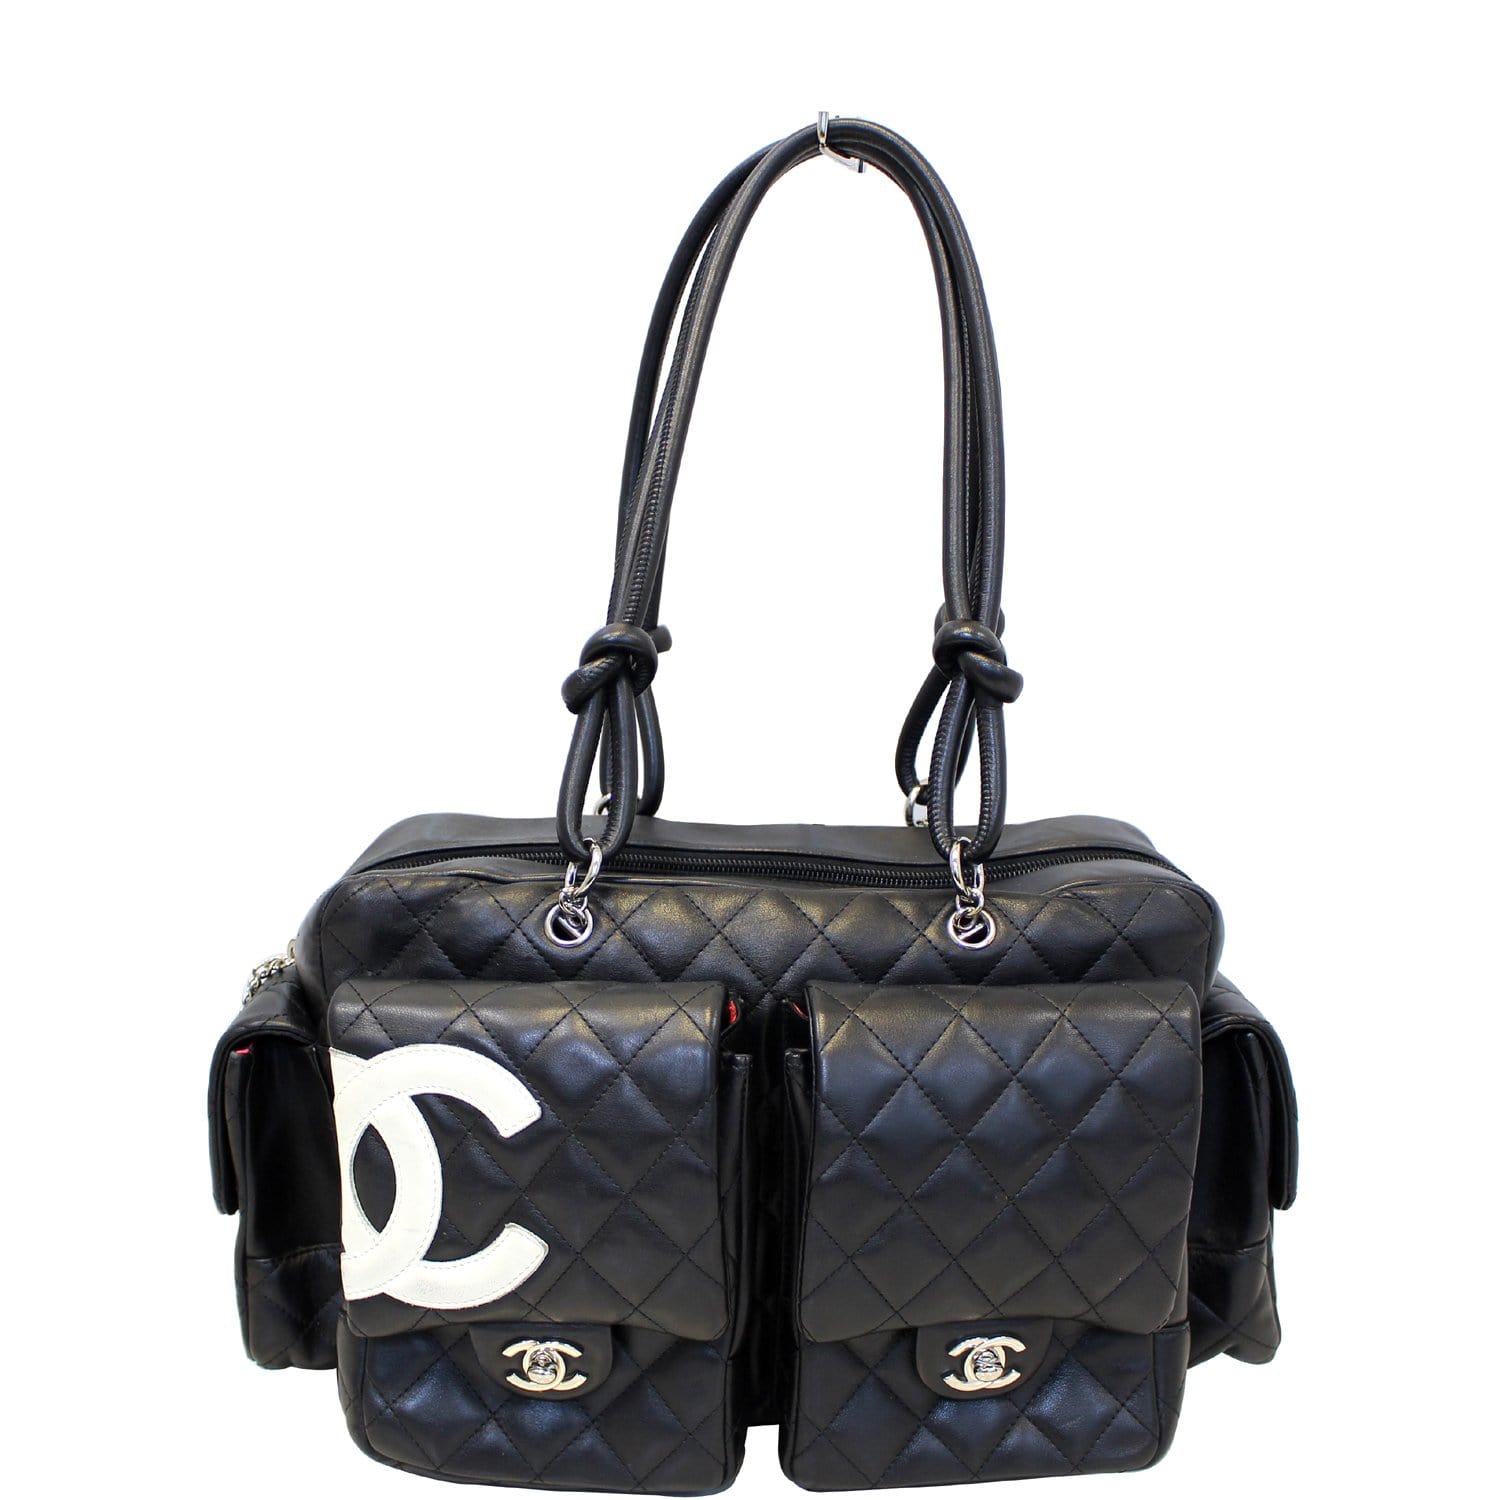 Best Deals for Chanel Cambon Reporter Bag